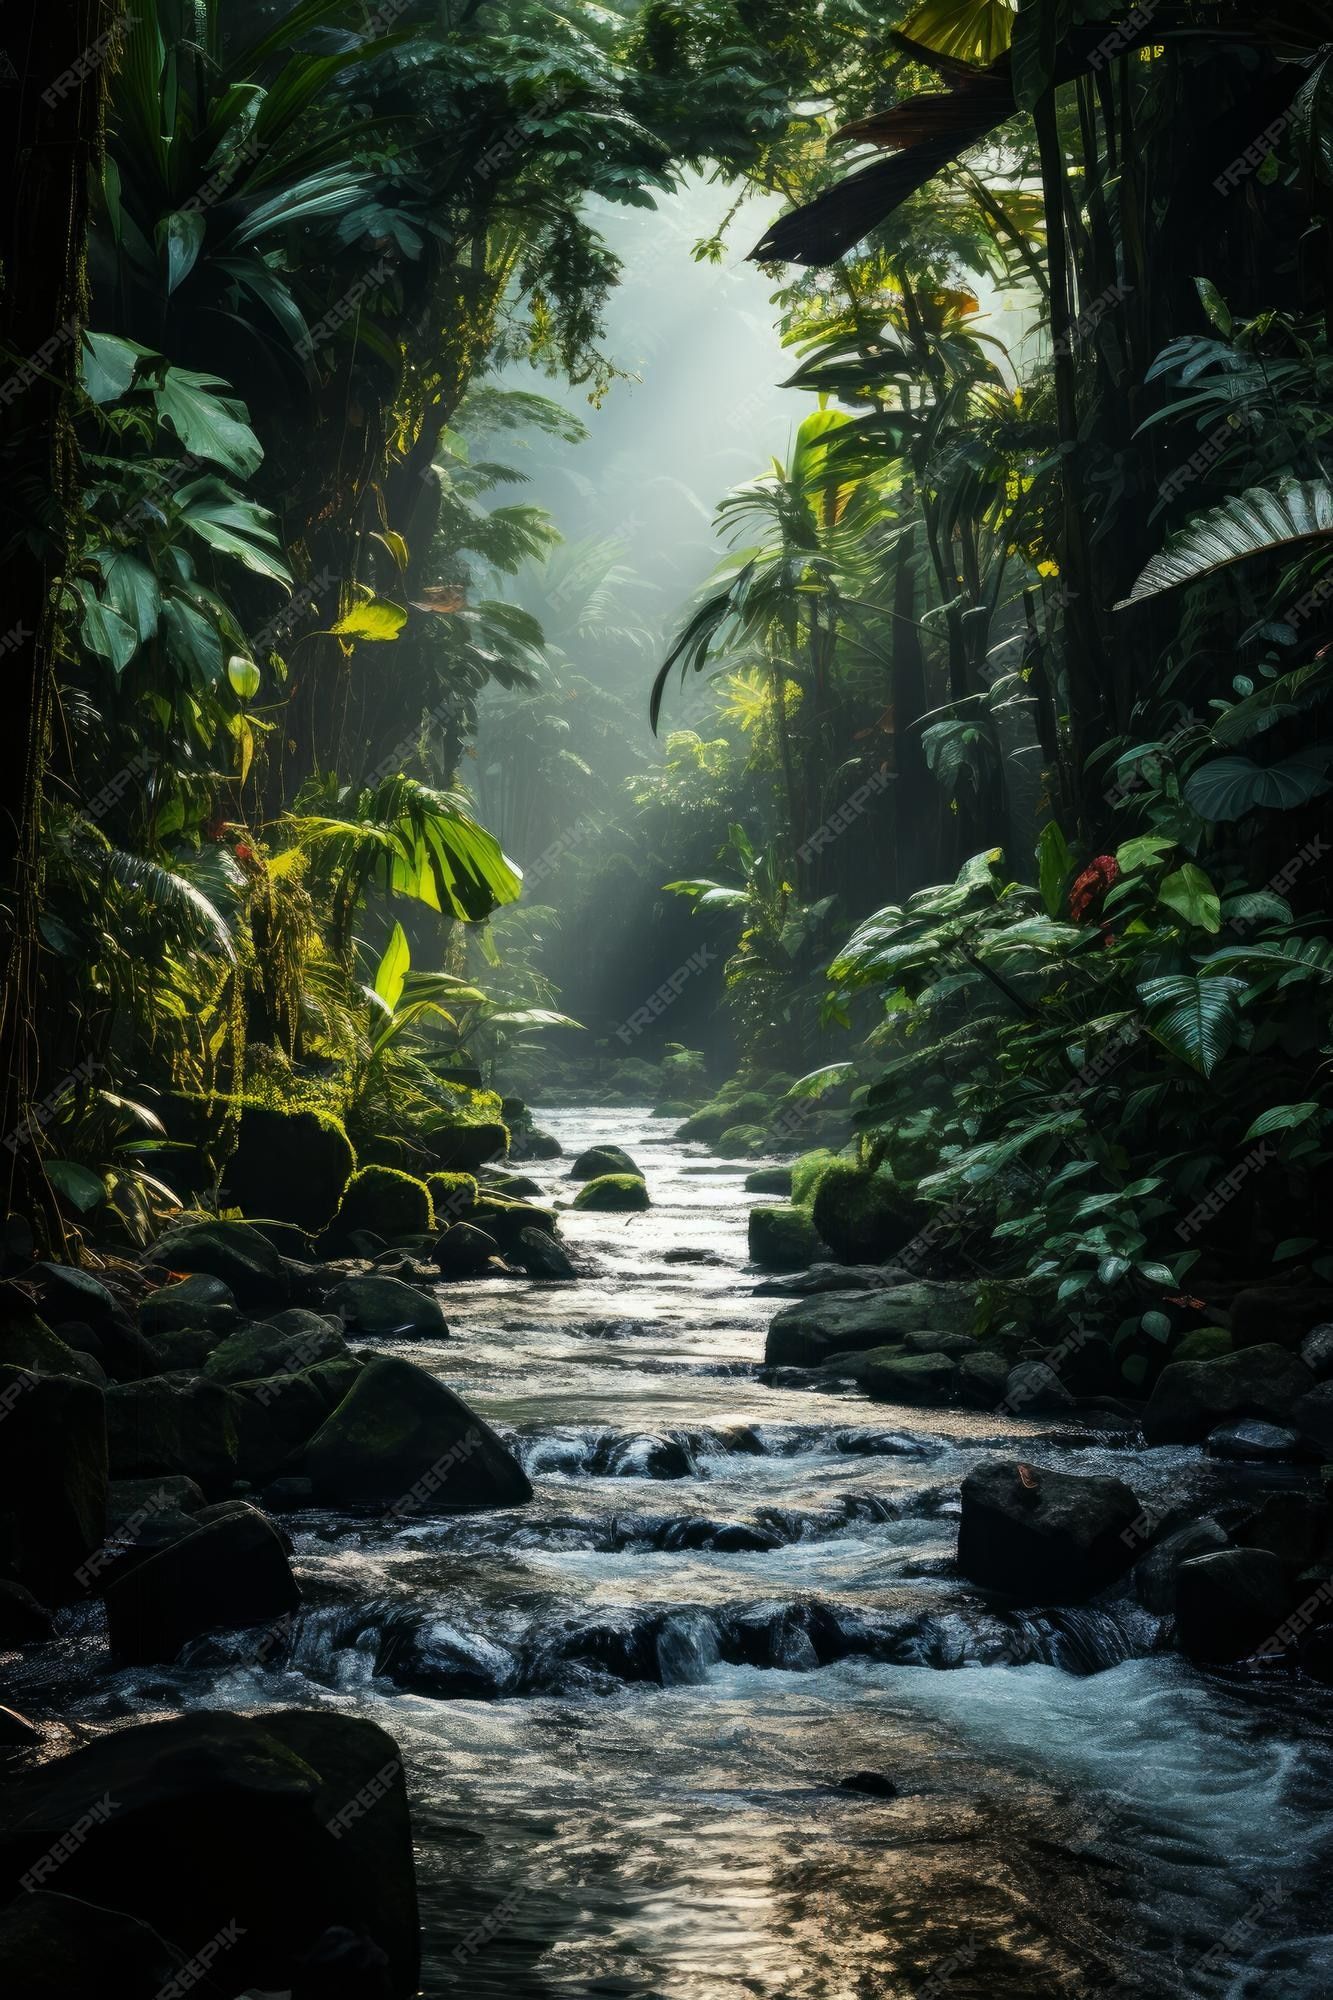 A river in the middle of a jungle - Jungle